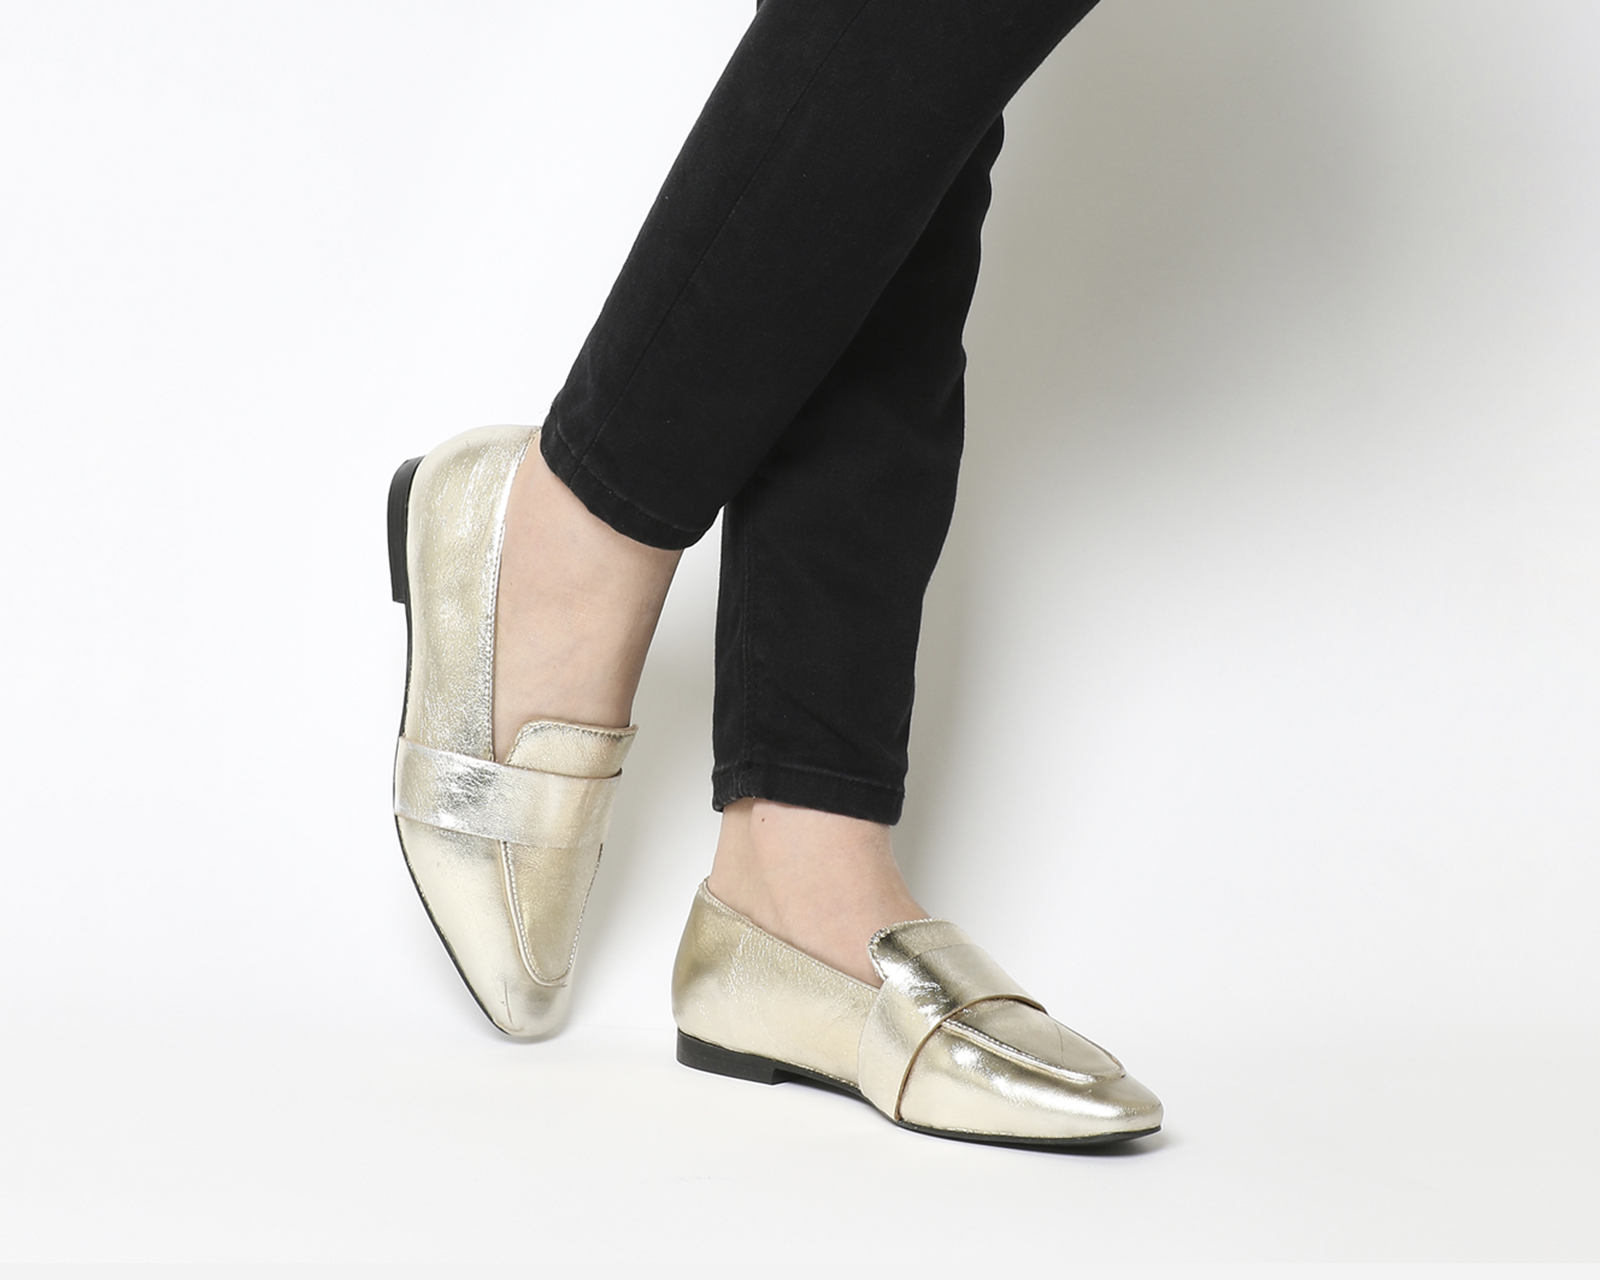 OFFICEPip Clean LoafersGold Metallic Leather